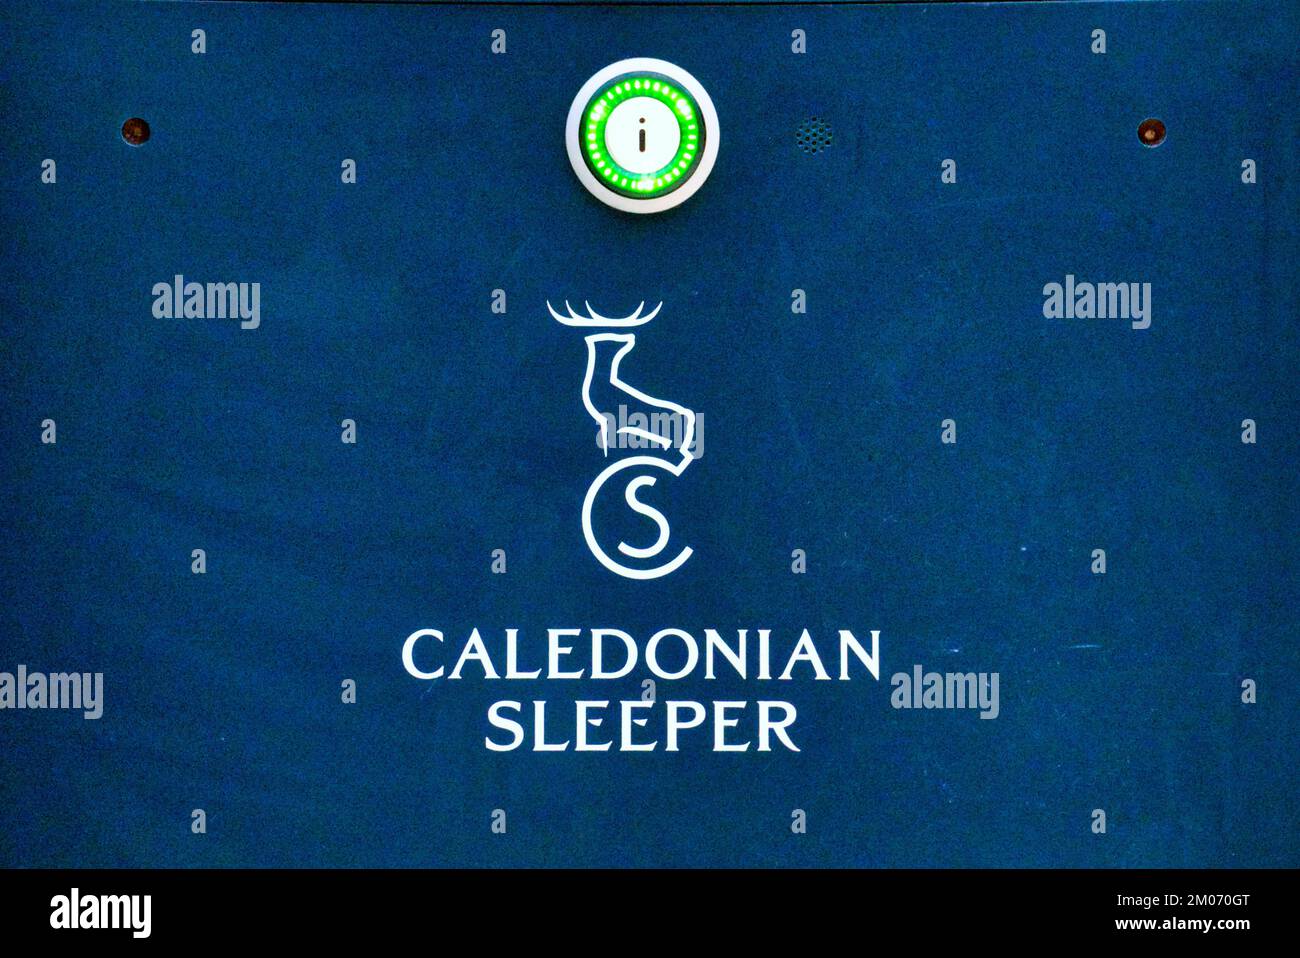 Caledonian sleeper in central station Stock Photo